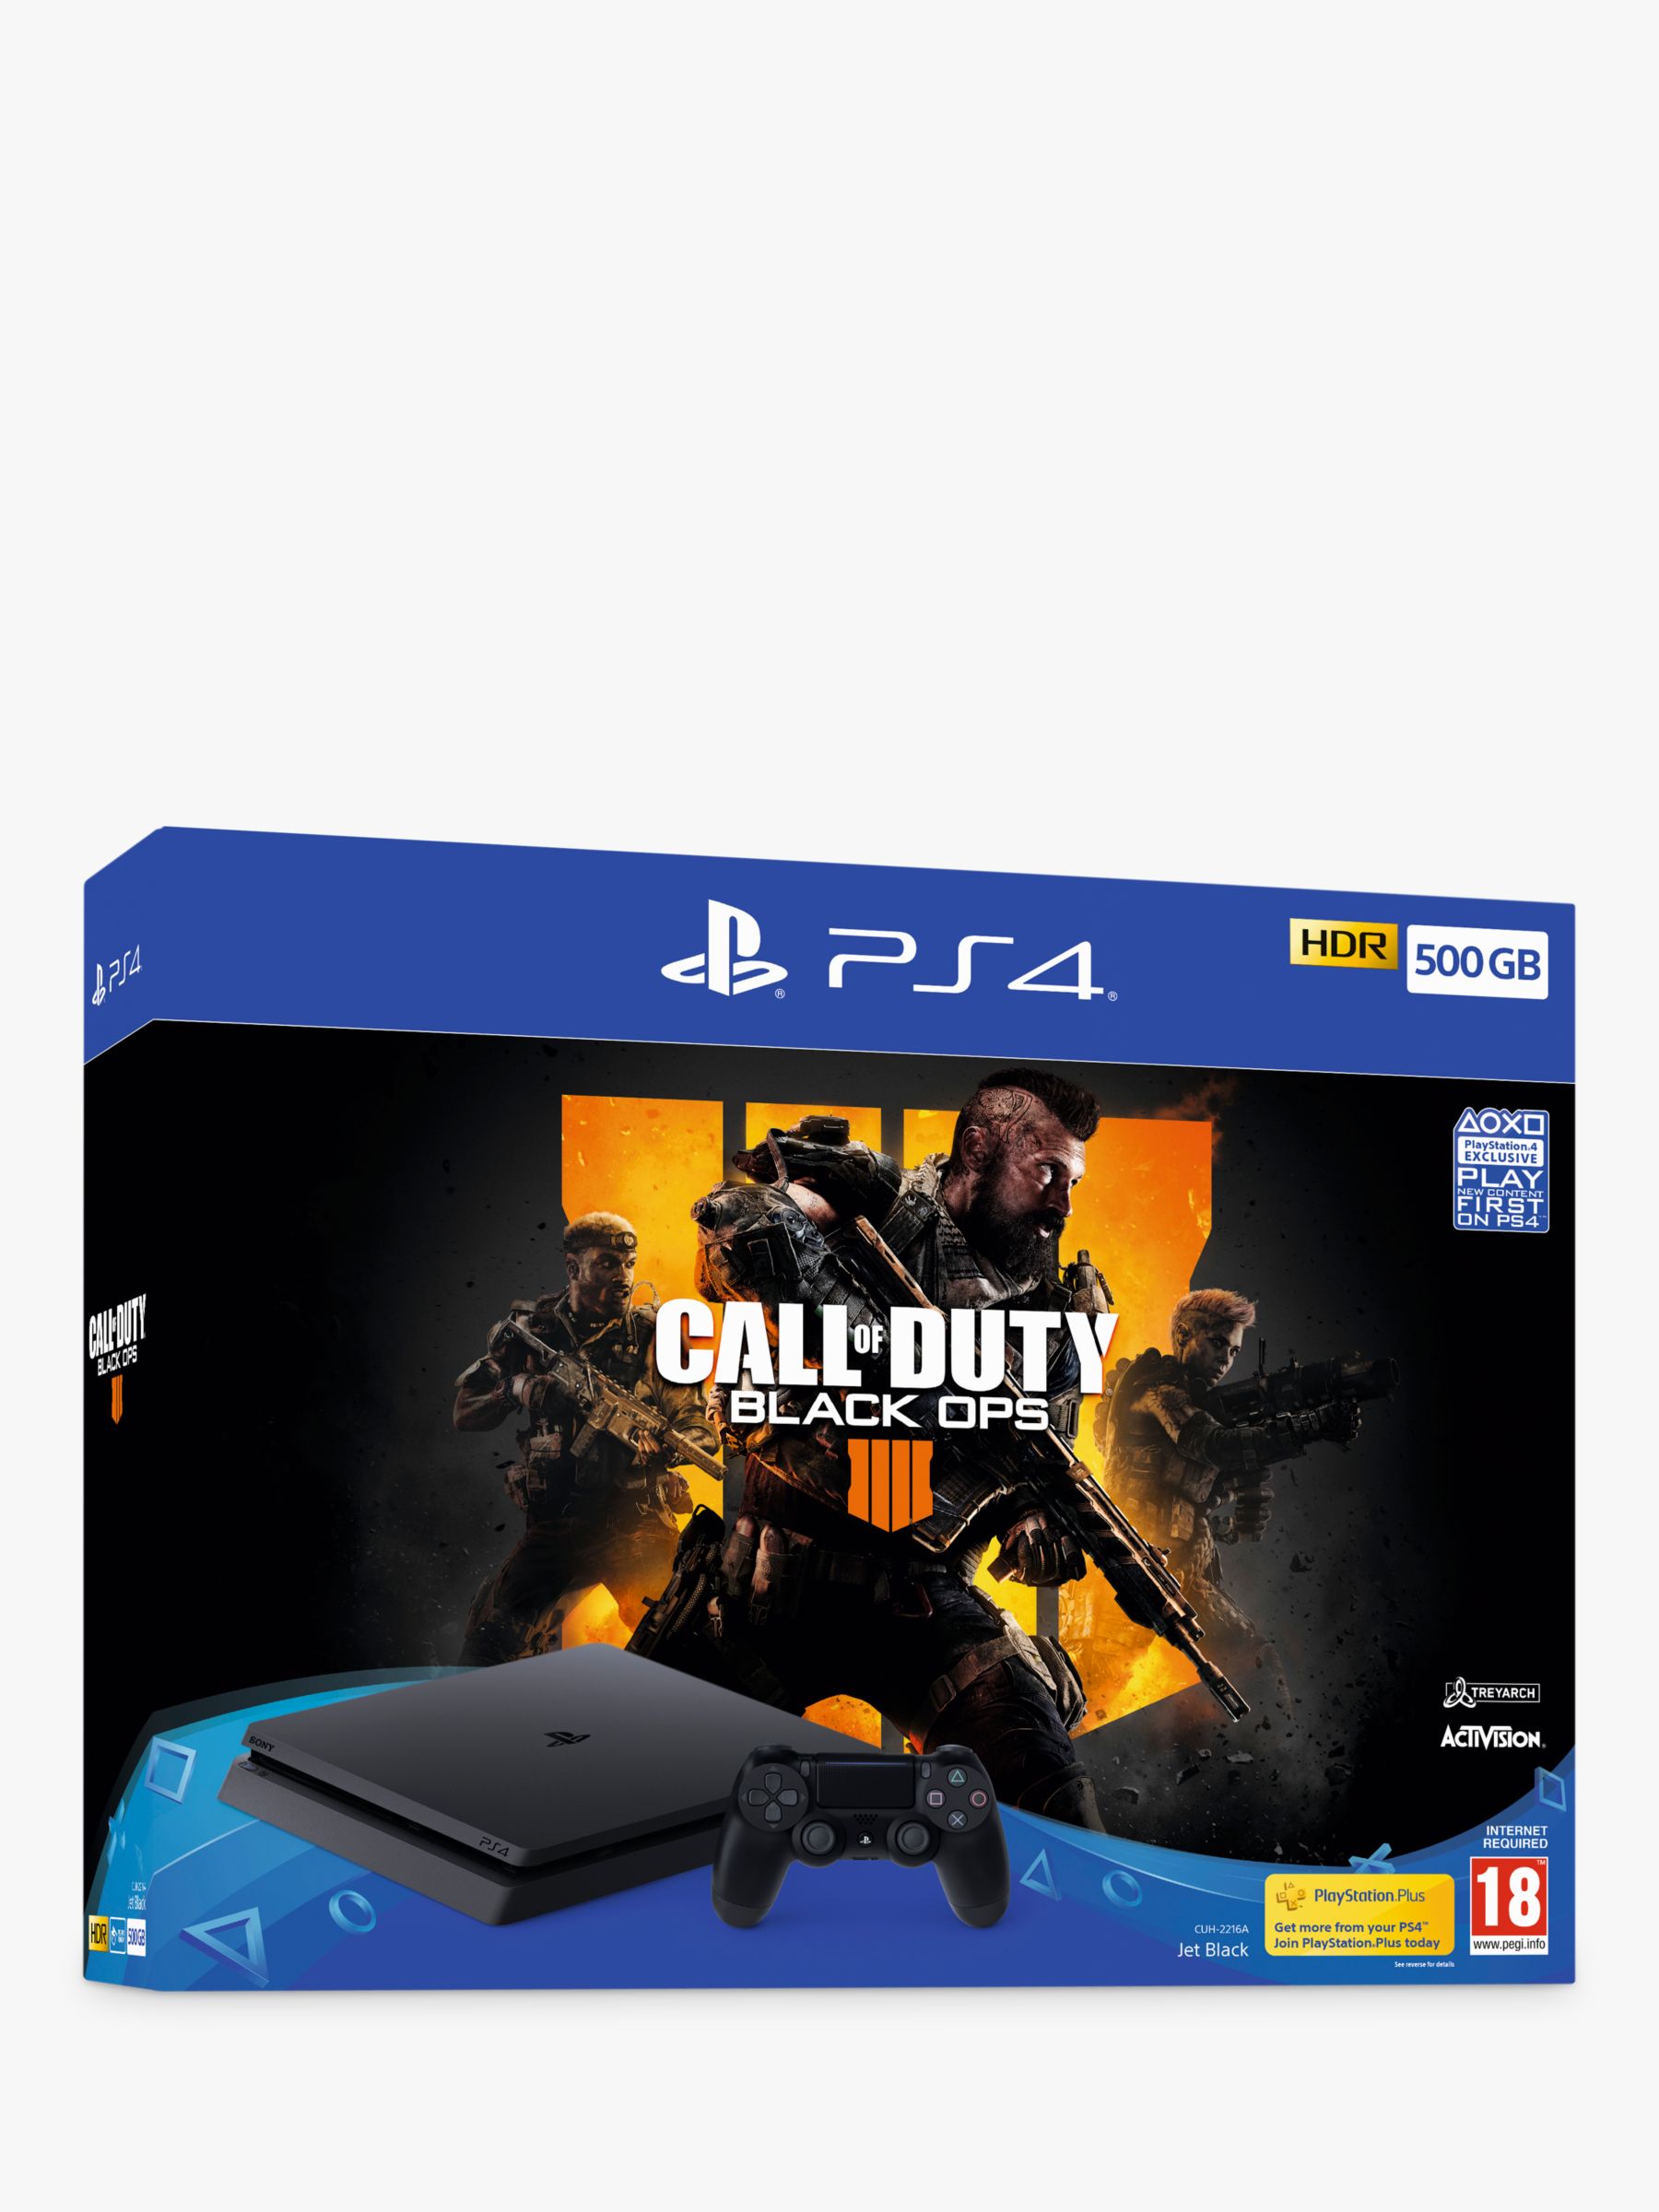 Sony PlayStation 4 Slim Console, 500GB, DualShock 4 Controller and Call of  Duty: Black Ops 4 Bundle - 